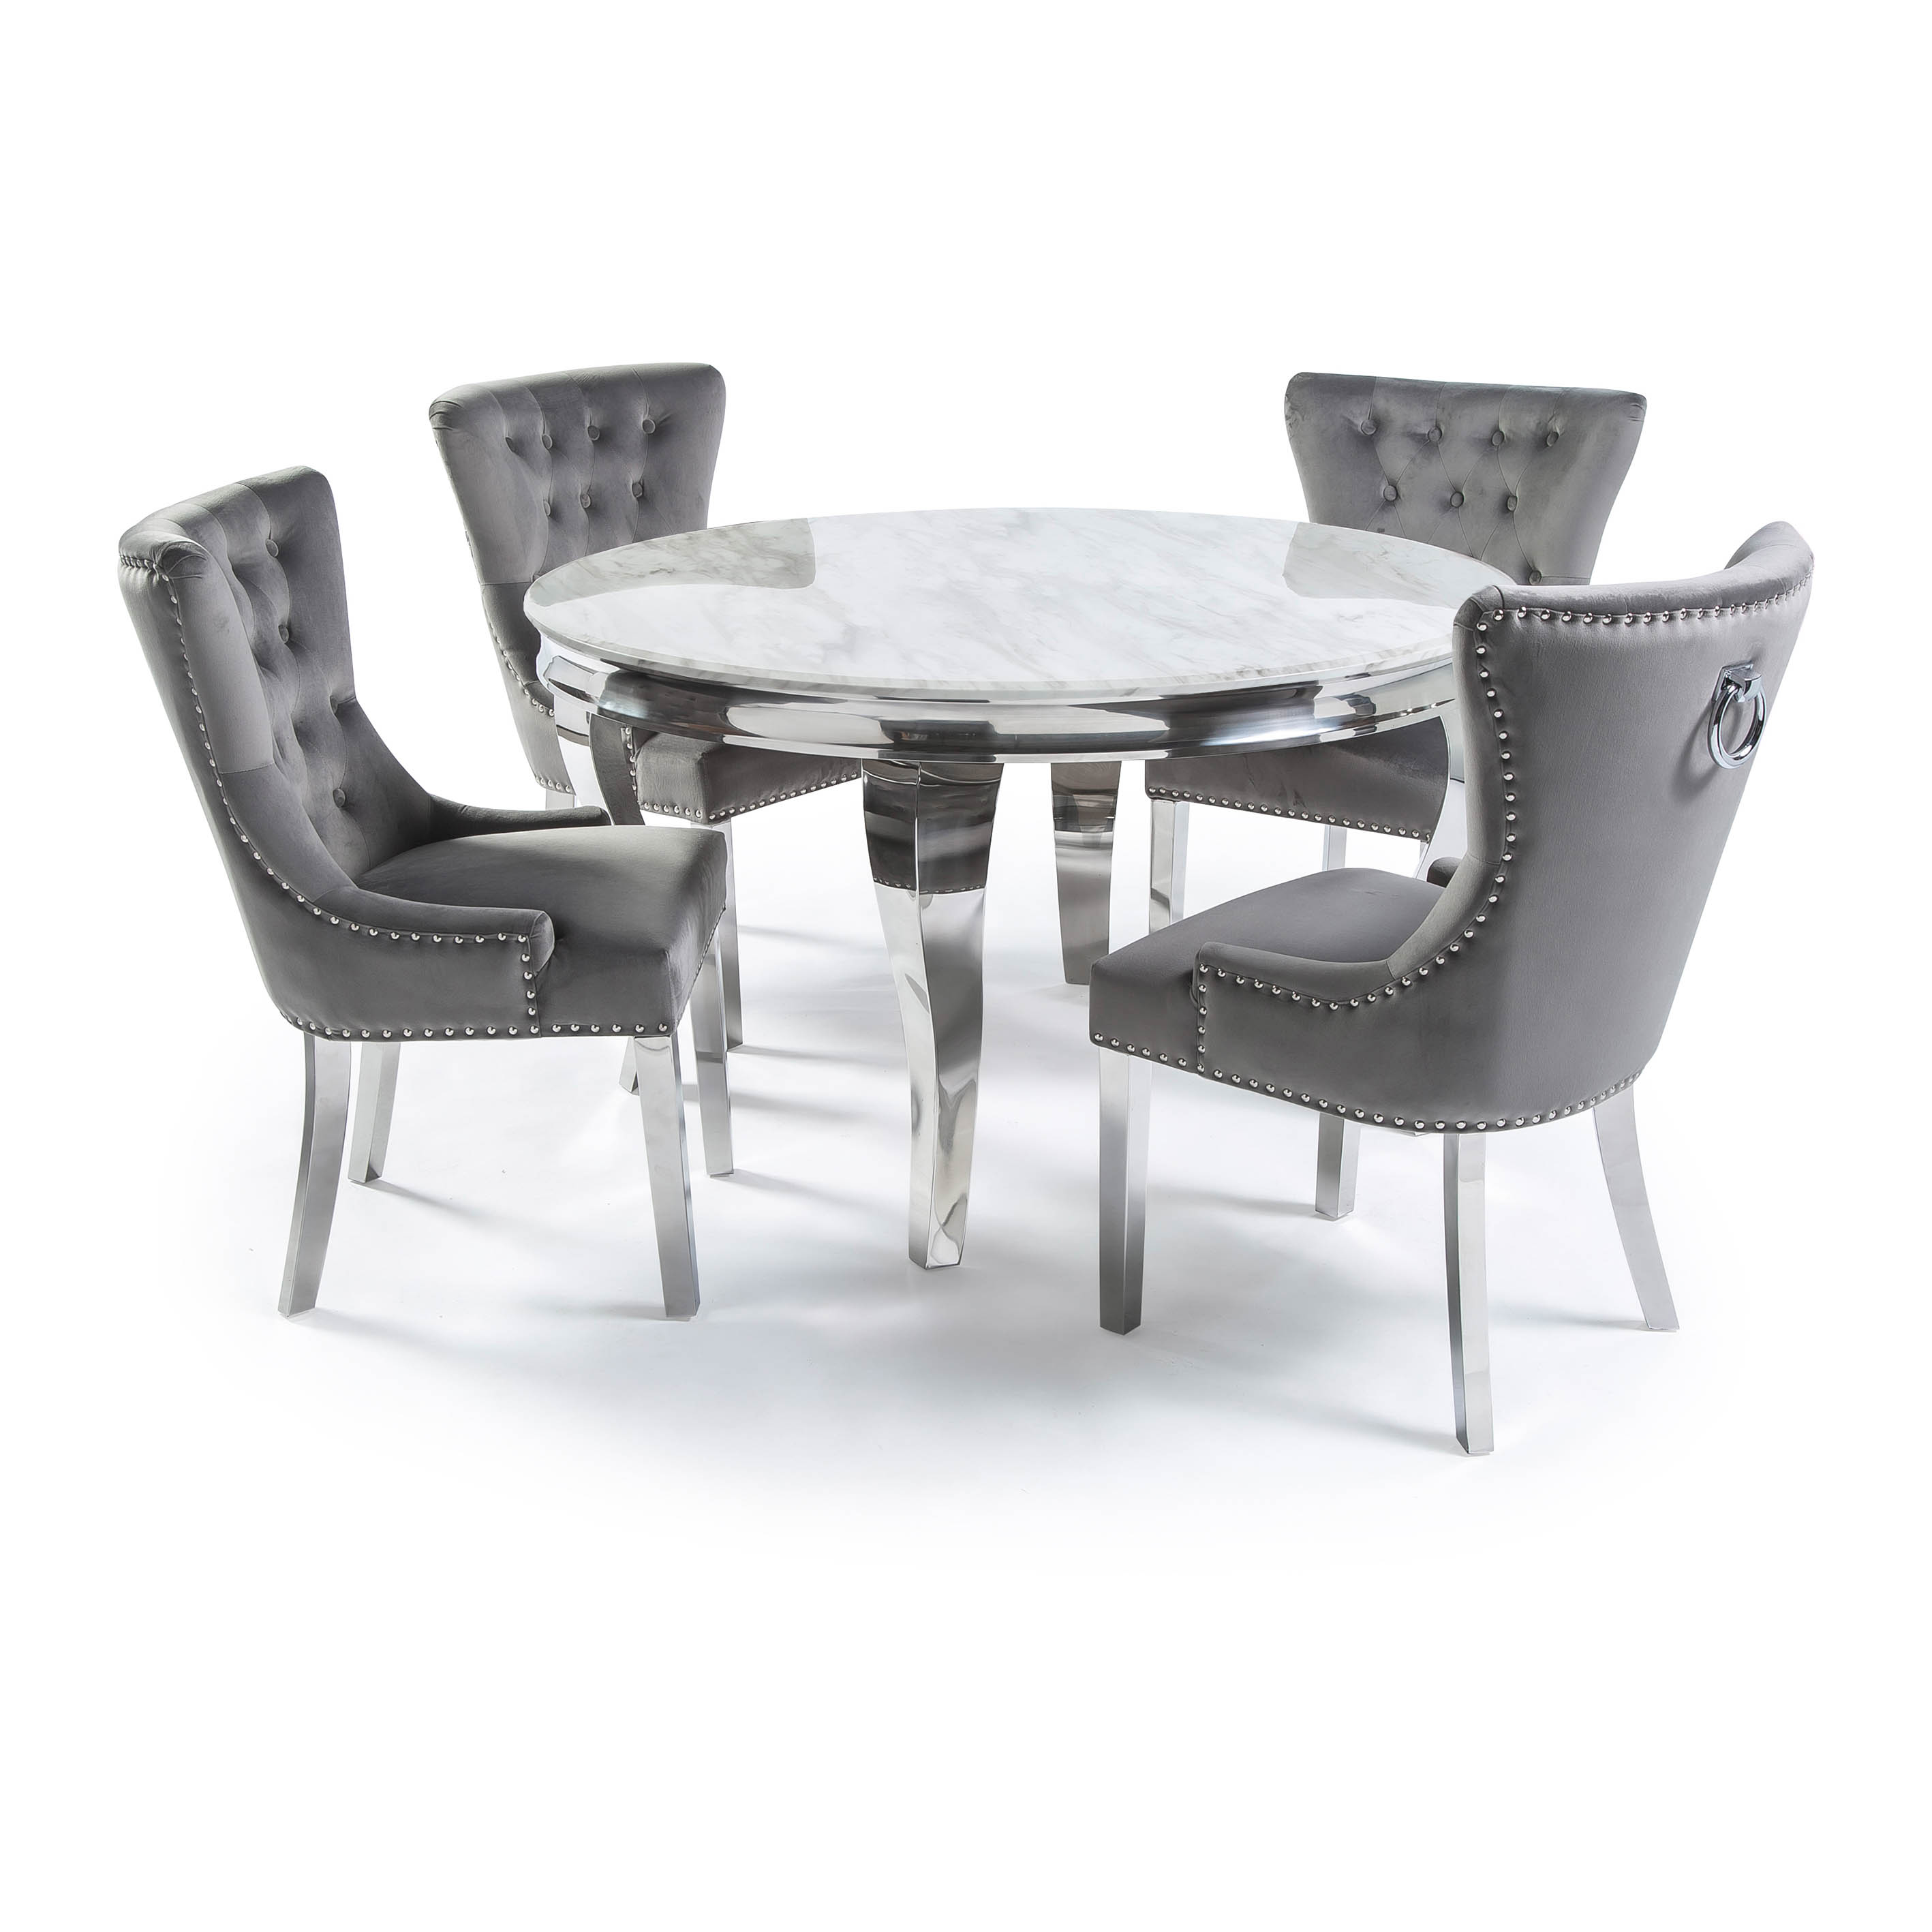 Luxury Dining Room Table And Chair Sets For Sale Grosvenor Furniture